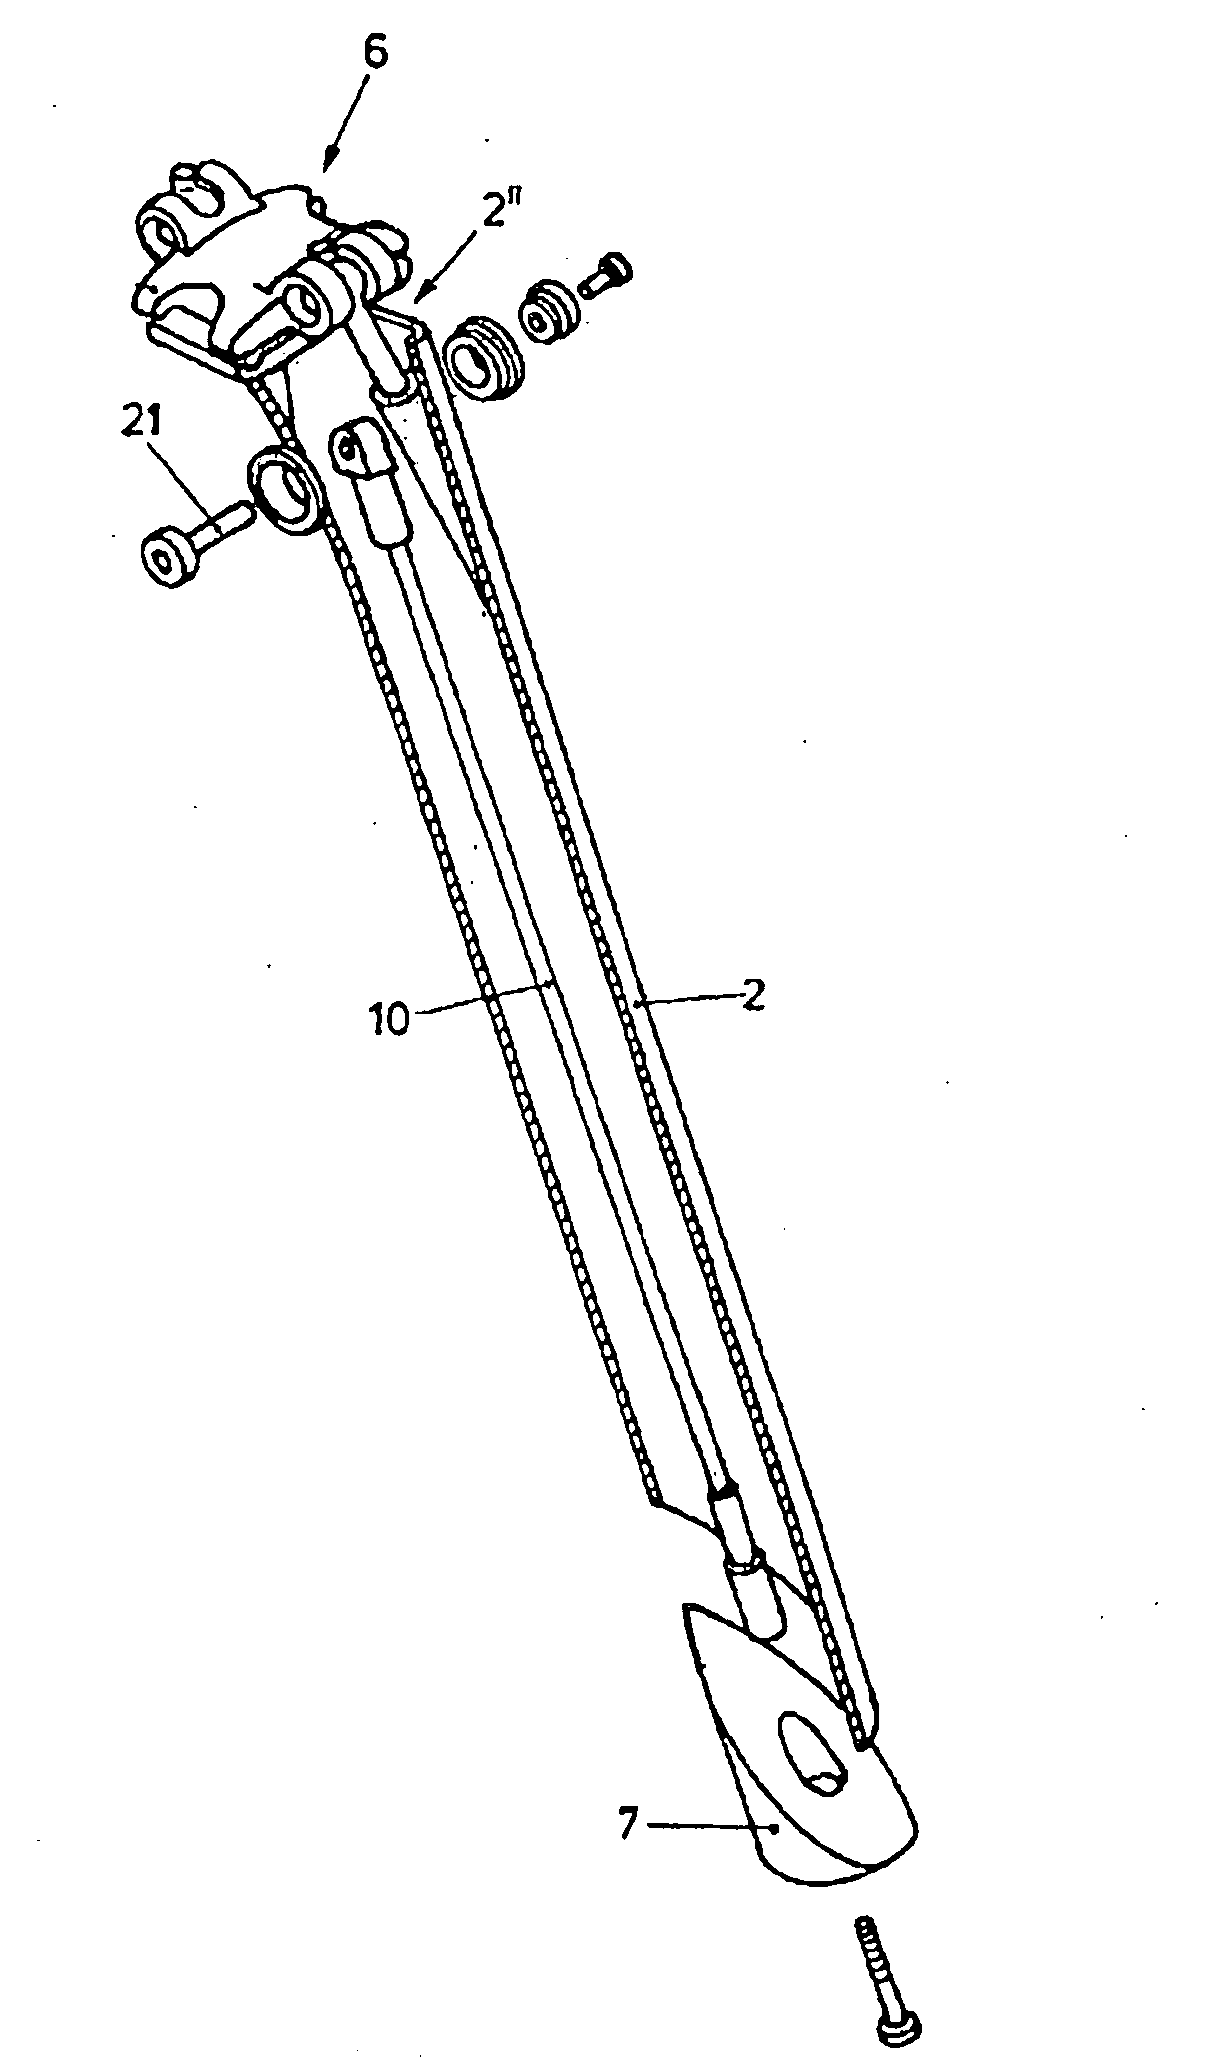 Support and holding device for bicycle saddle